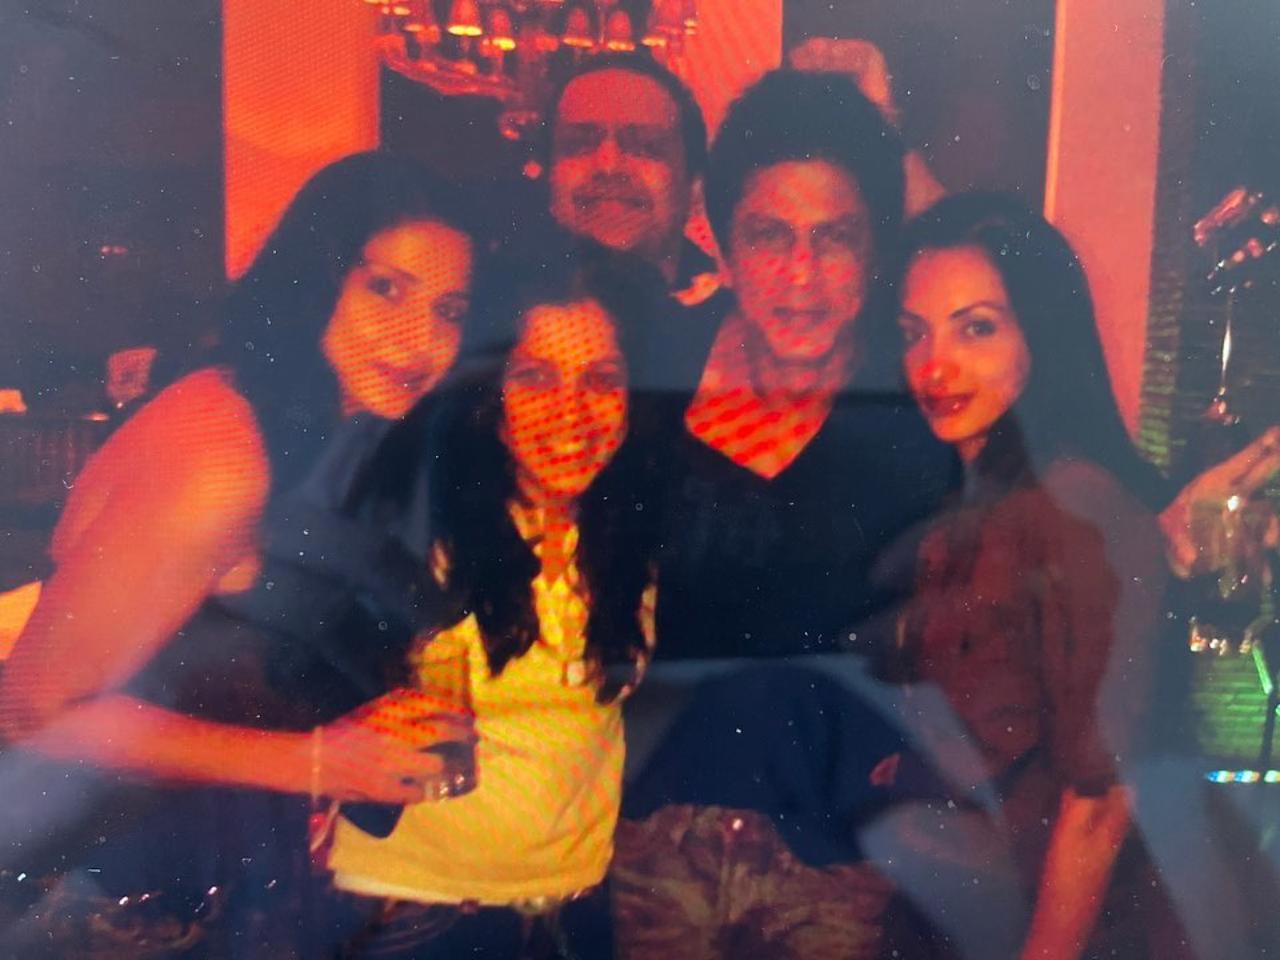 Shah Rukh Khan is a favourite among the star wives as well. In the first season, the superstar made a cameo where the wives revealed how Khan would babysit all their kids